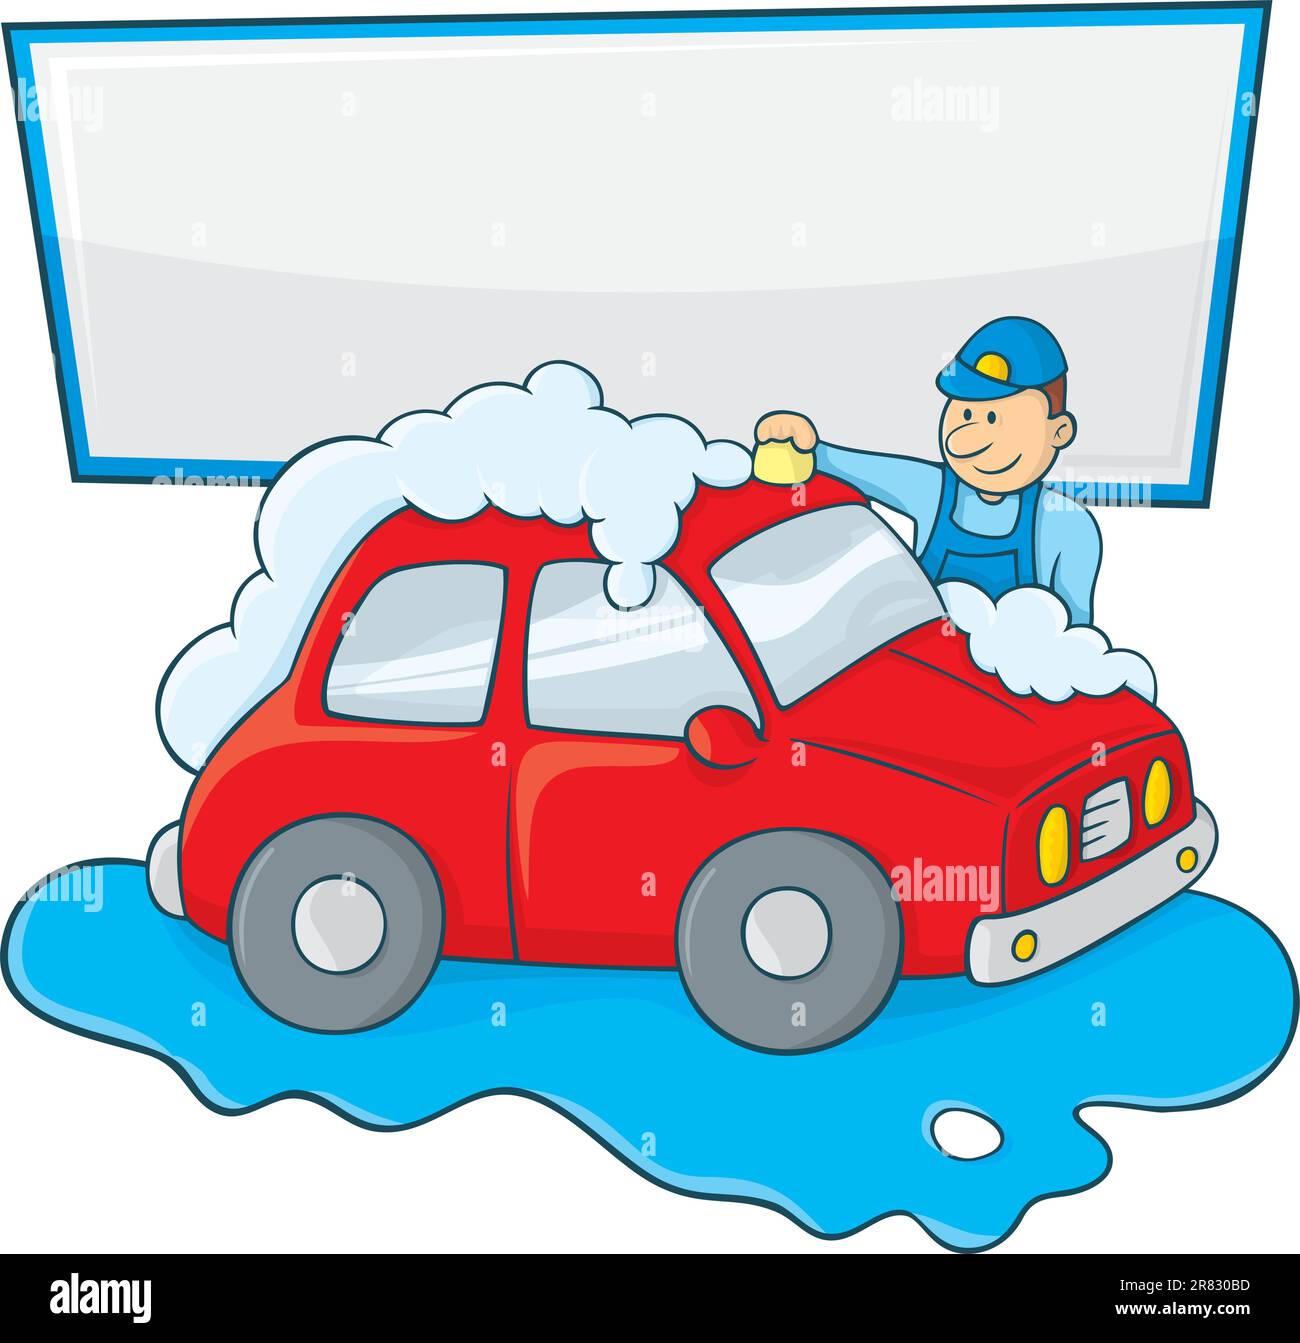 Cartoon of a man in blue form hand washing a red car with copy space for your message. Stock Vector